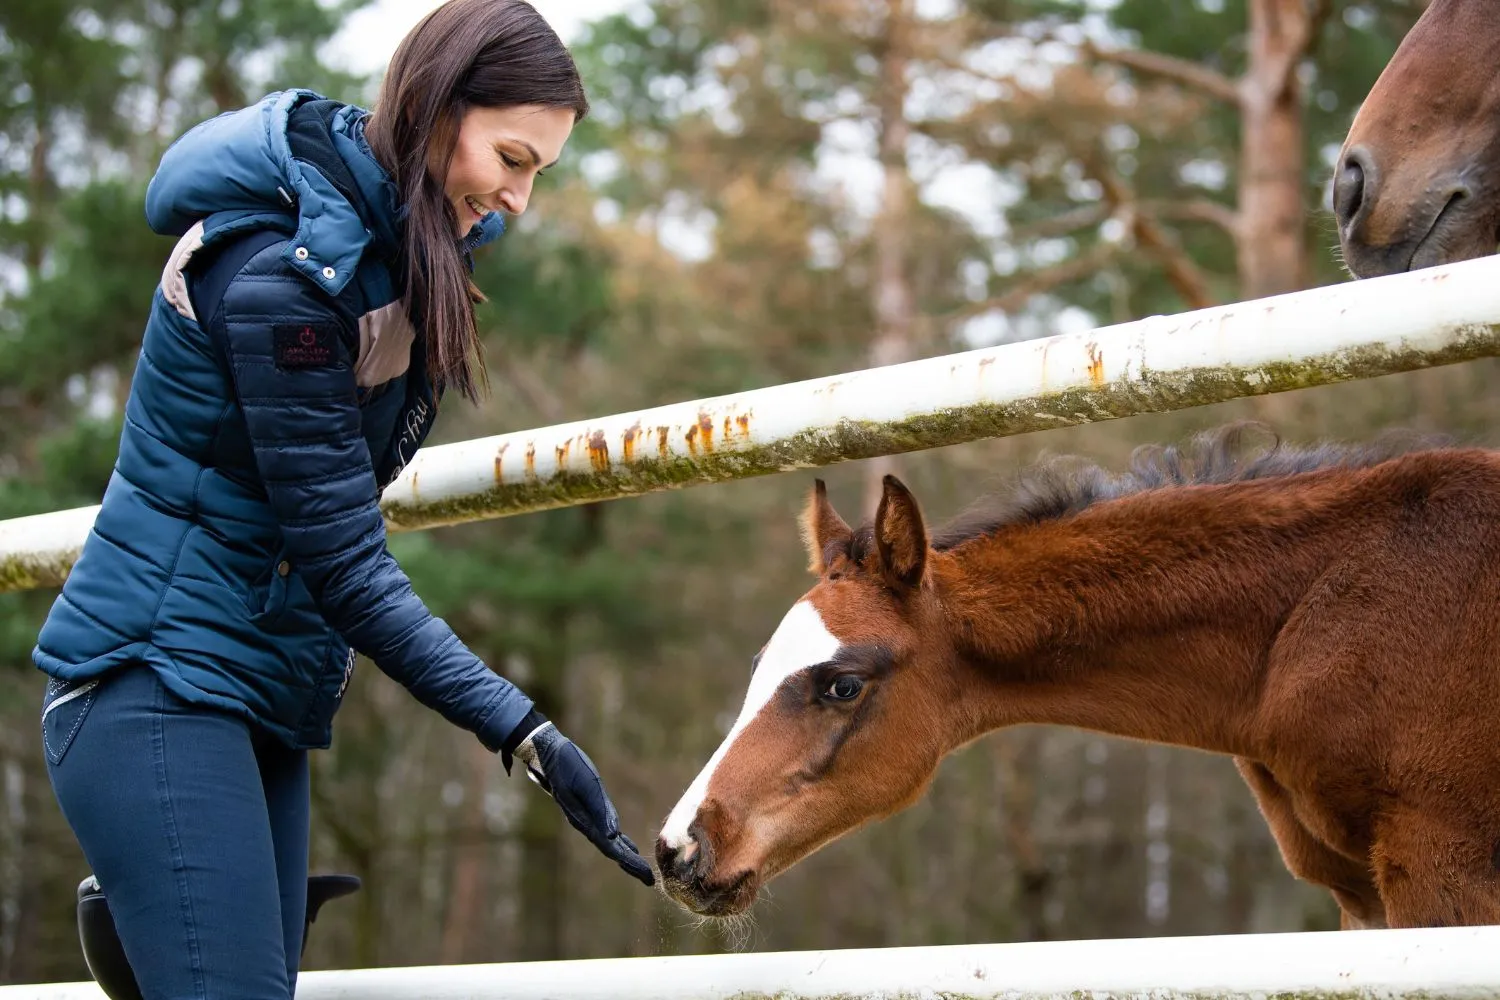 The joys and challenges of the newborn foal